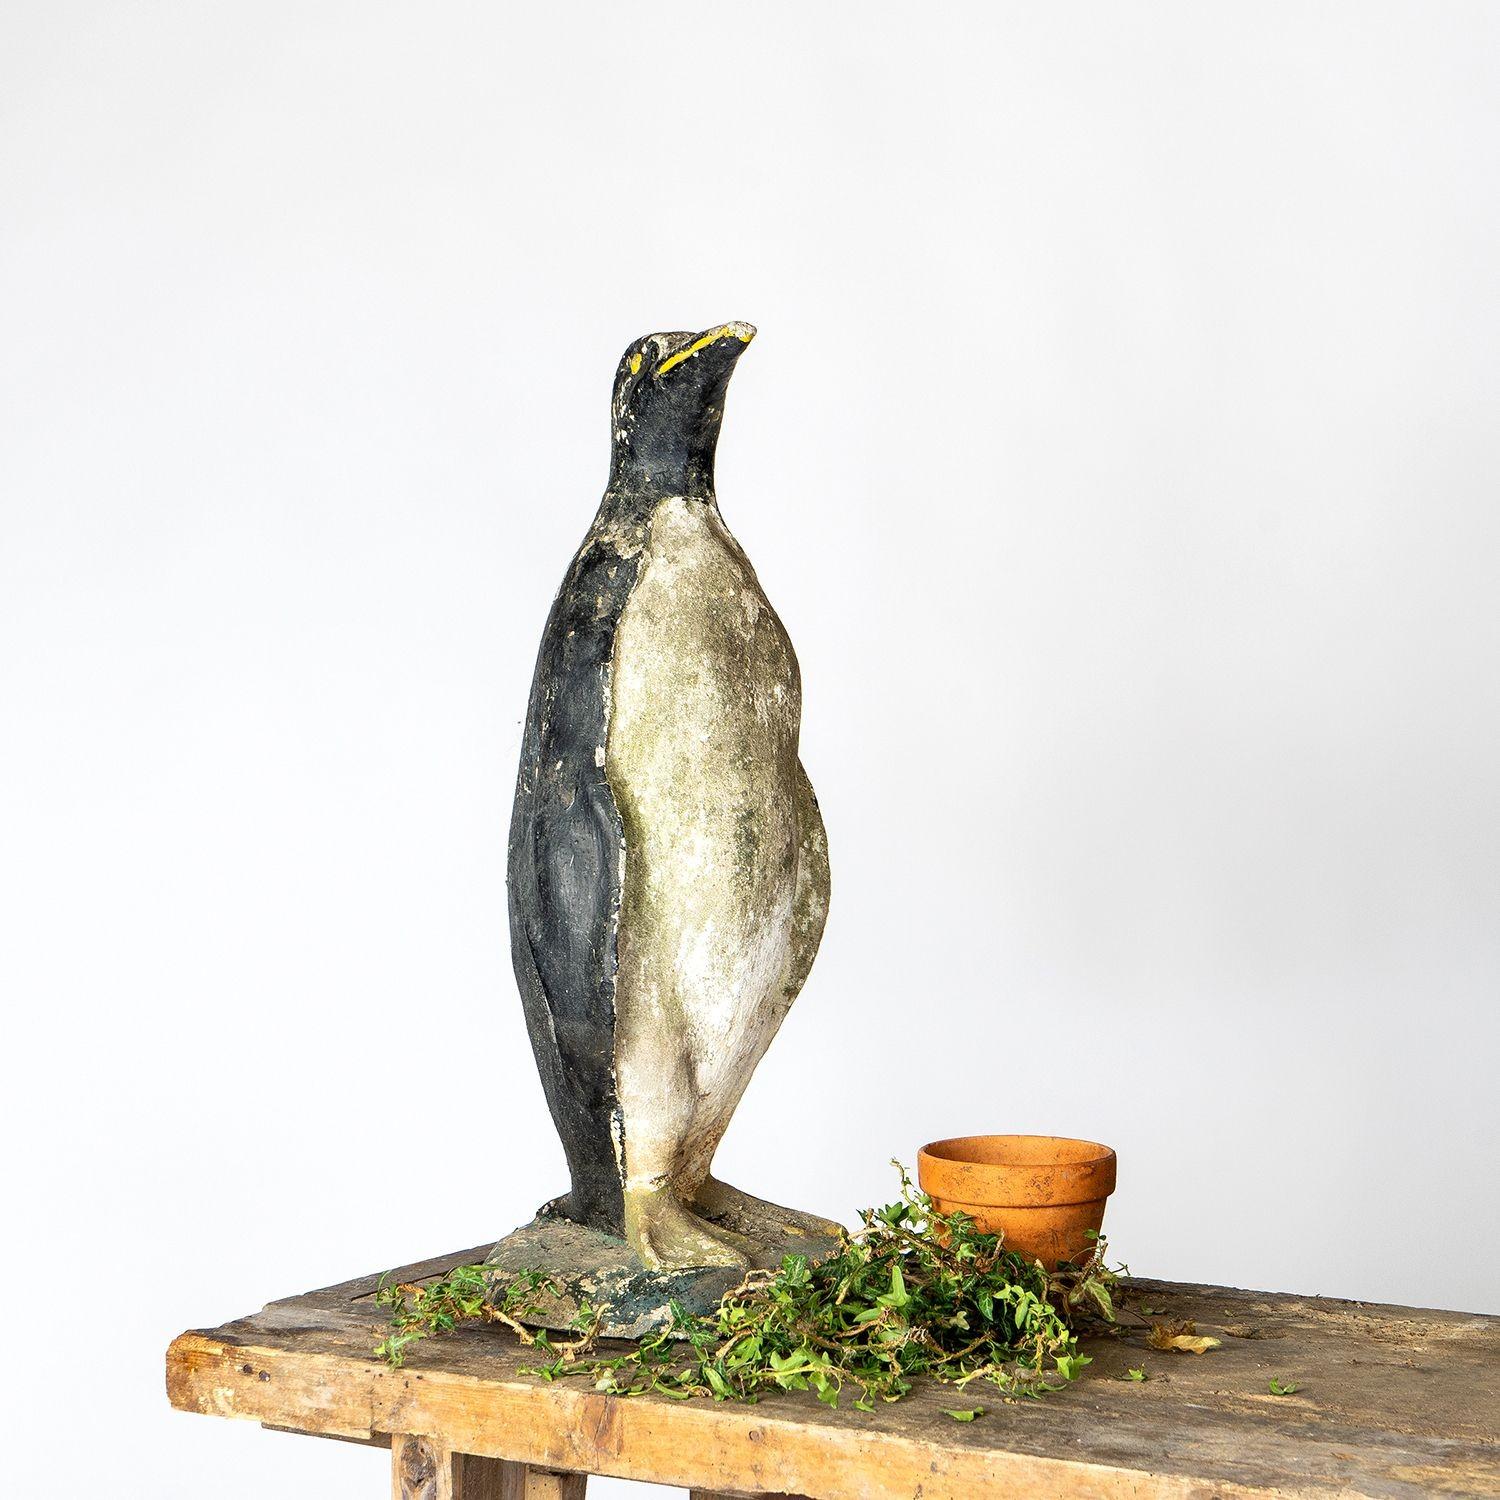 Vintage French Reconstituted Stone Penguin Garden Statue Figure c. 1930s 2